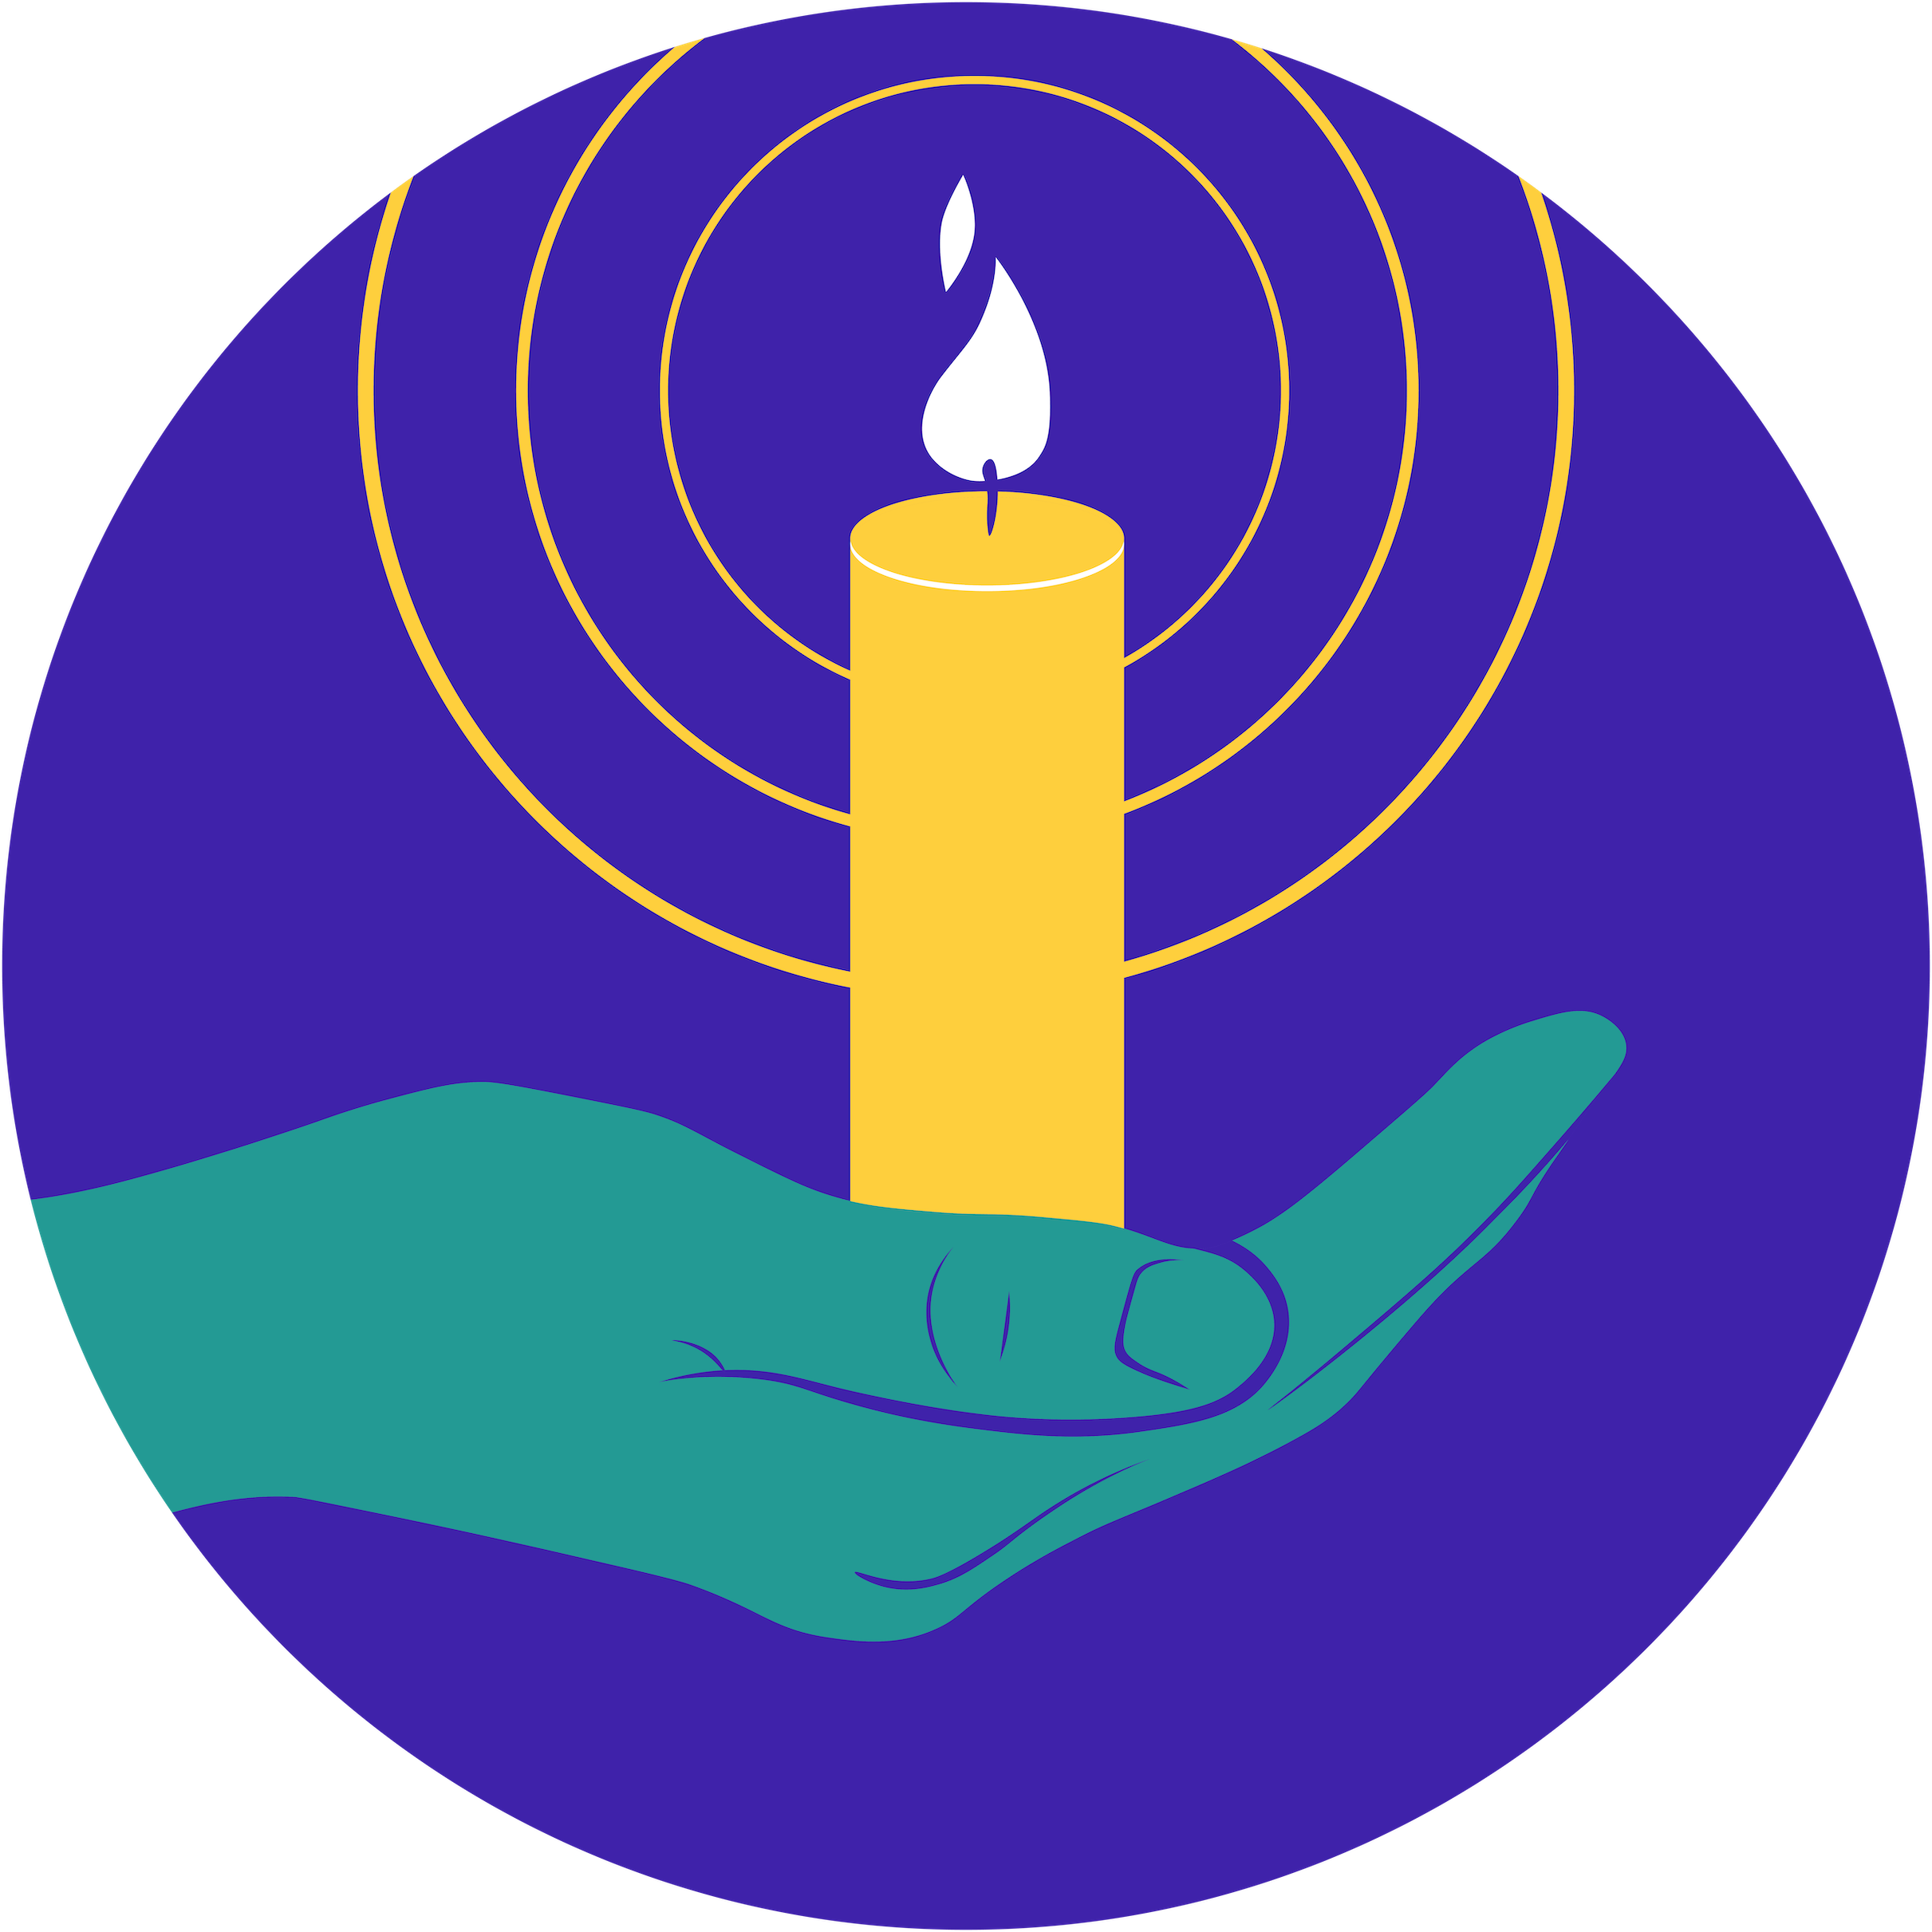 Gathering Space candle in hand icon